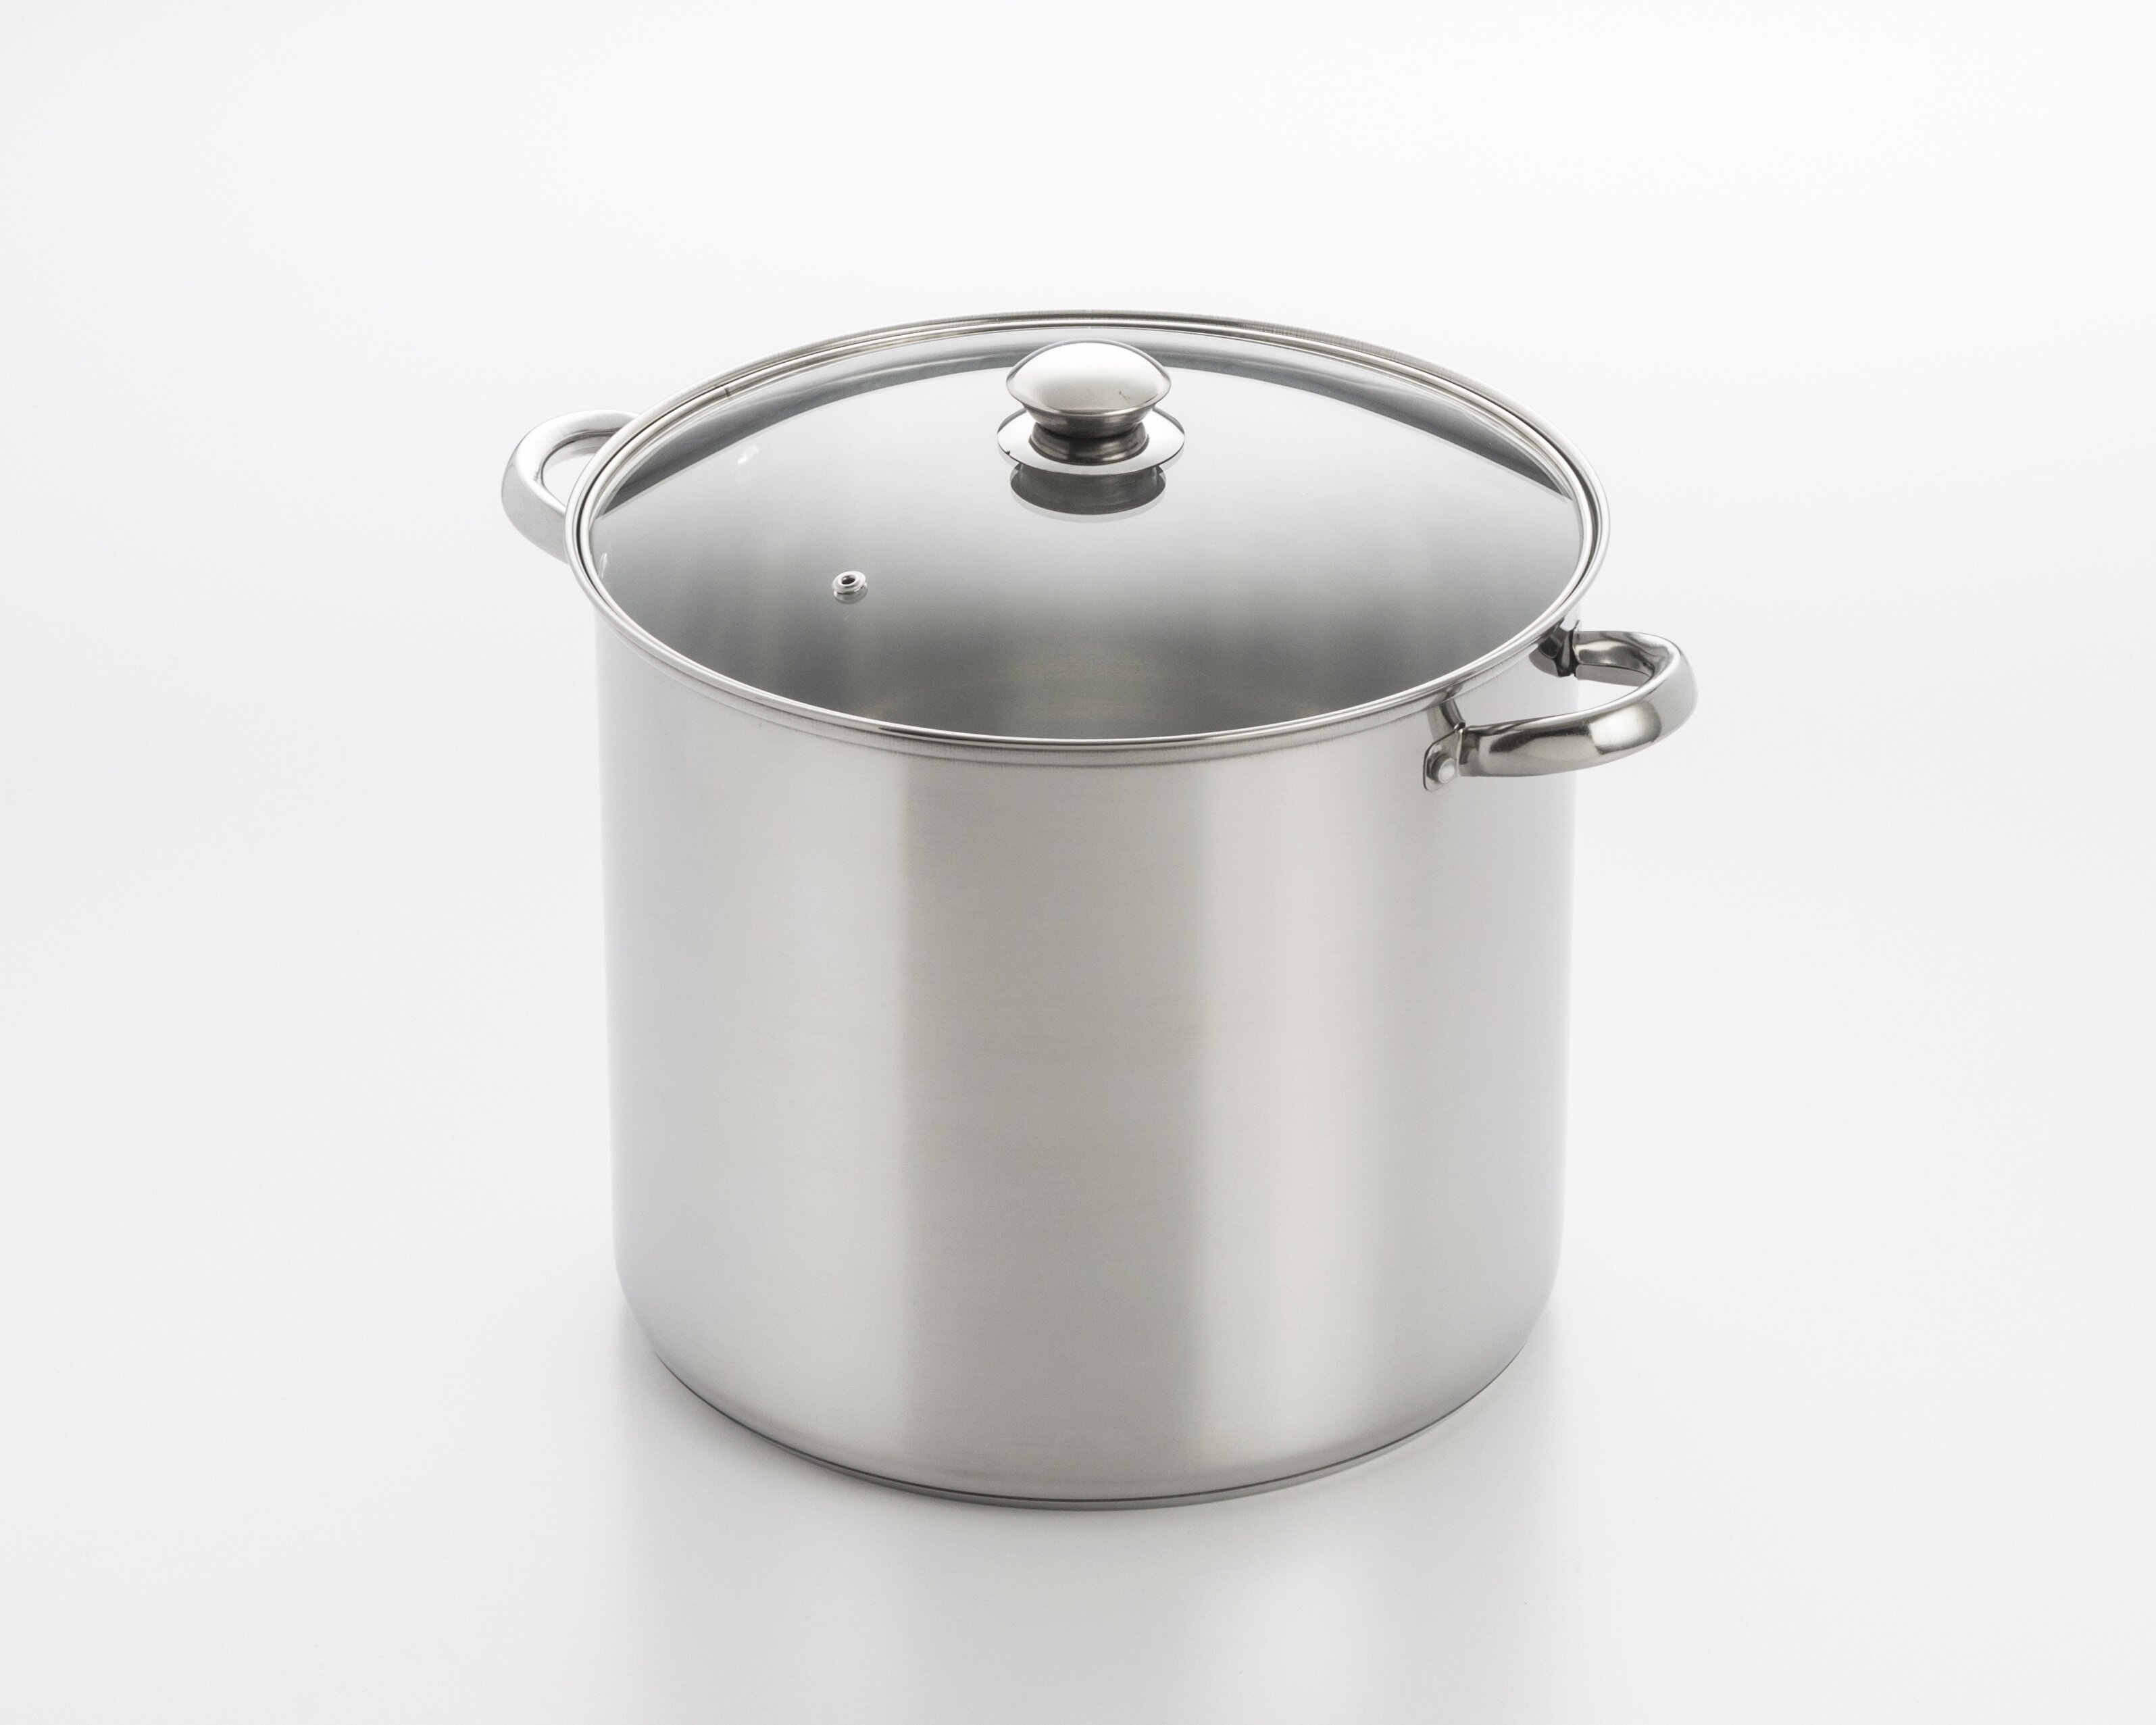 Induction 21 Steel Stockpot with Lid (12 Qt.) & Steamer/Pasta Insert